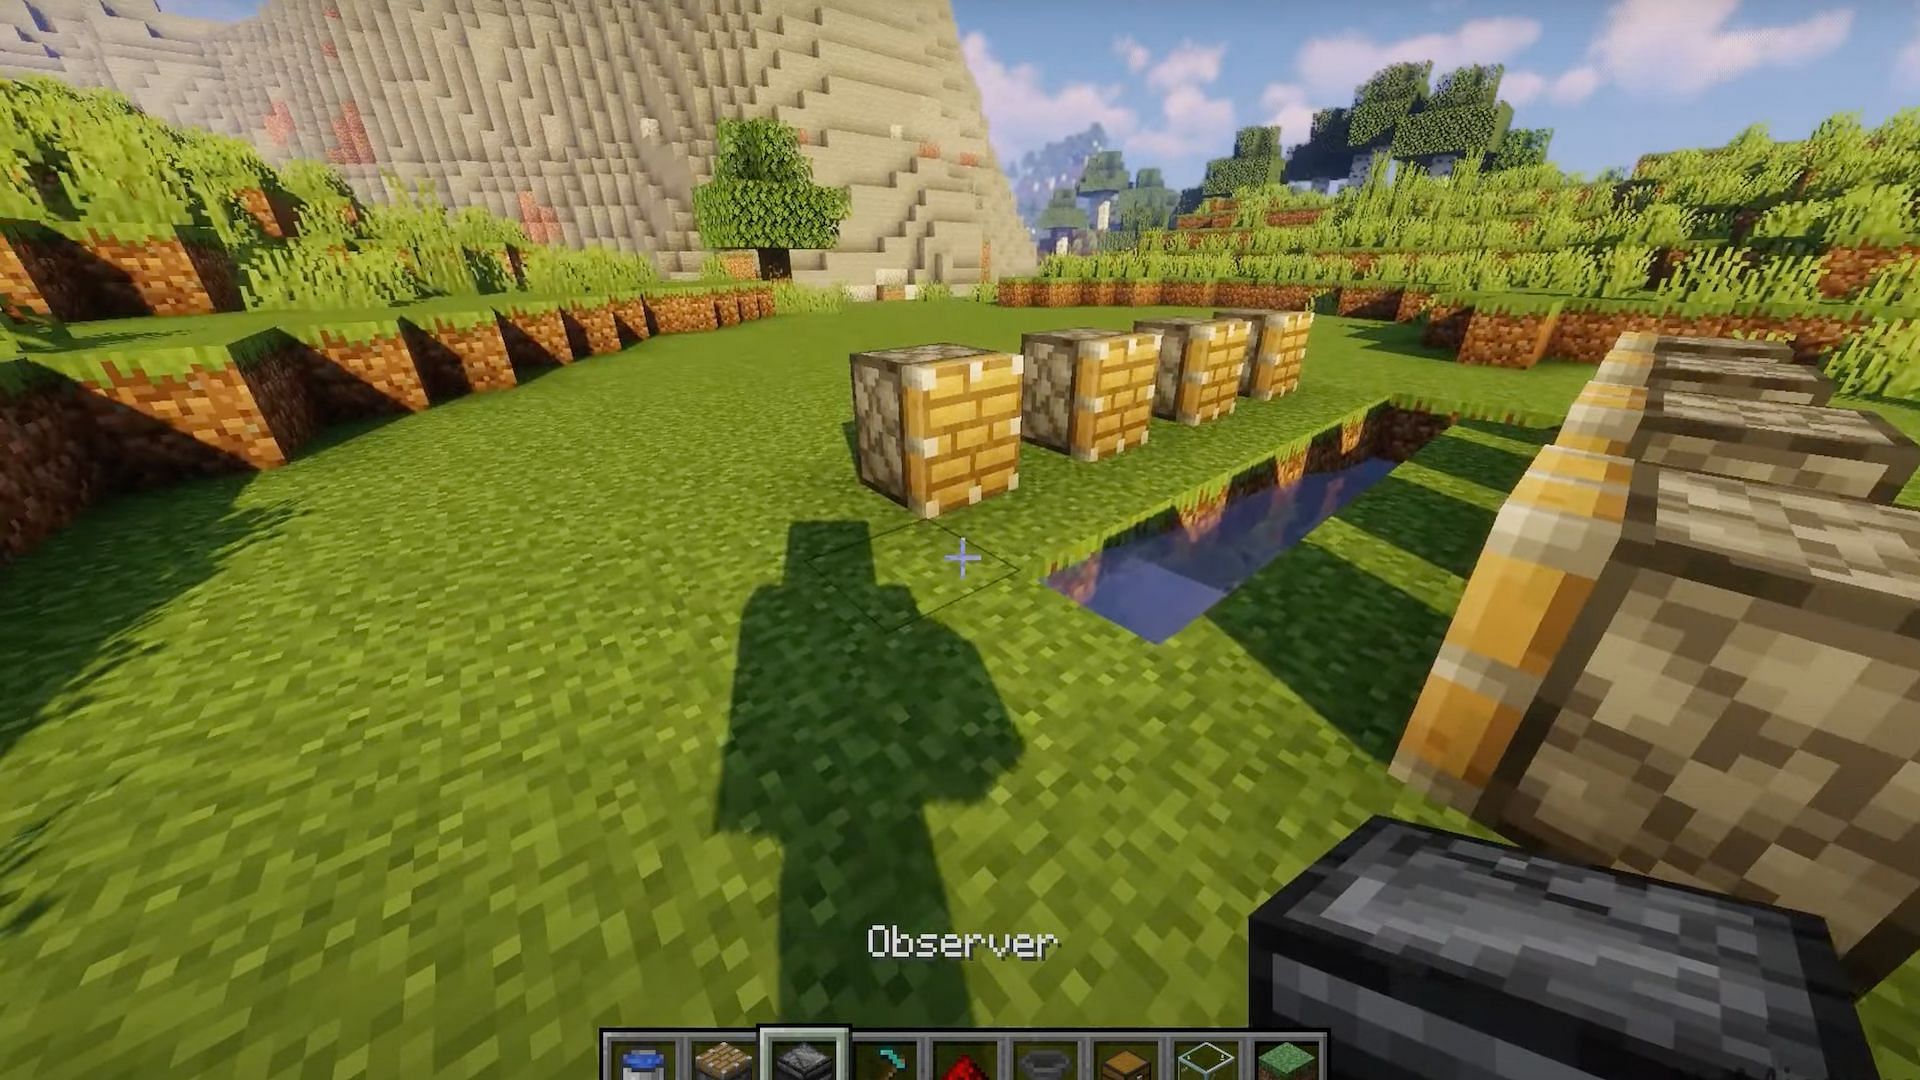 Pistons should be placed to make this Minecraft farm function properly (Image via NaMiature/YouTube)